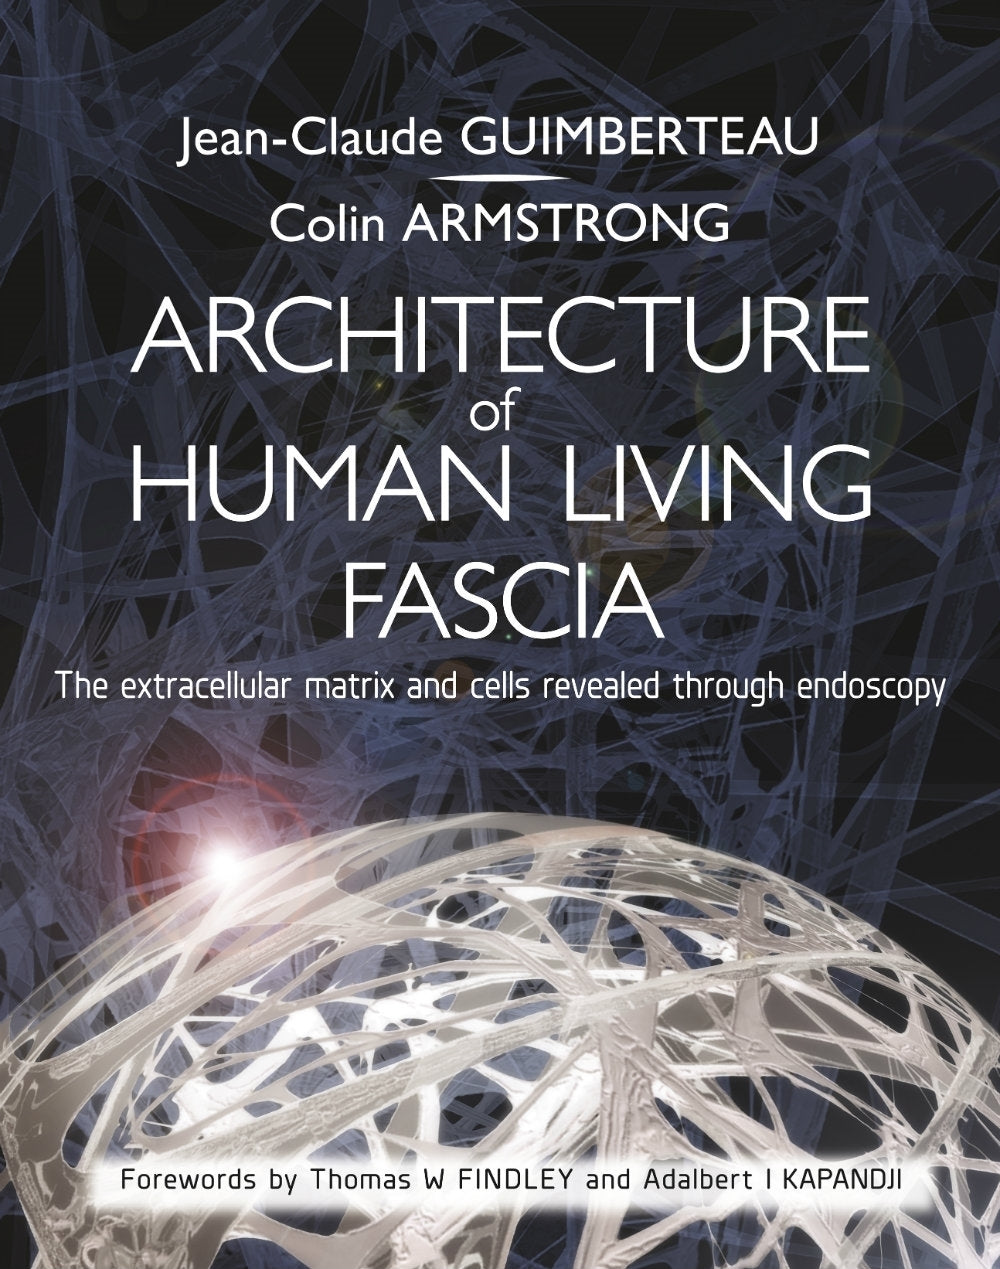 Architecture of Human Living Fascia by Jean Claude Guimberteau, Colin Armstrong